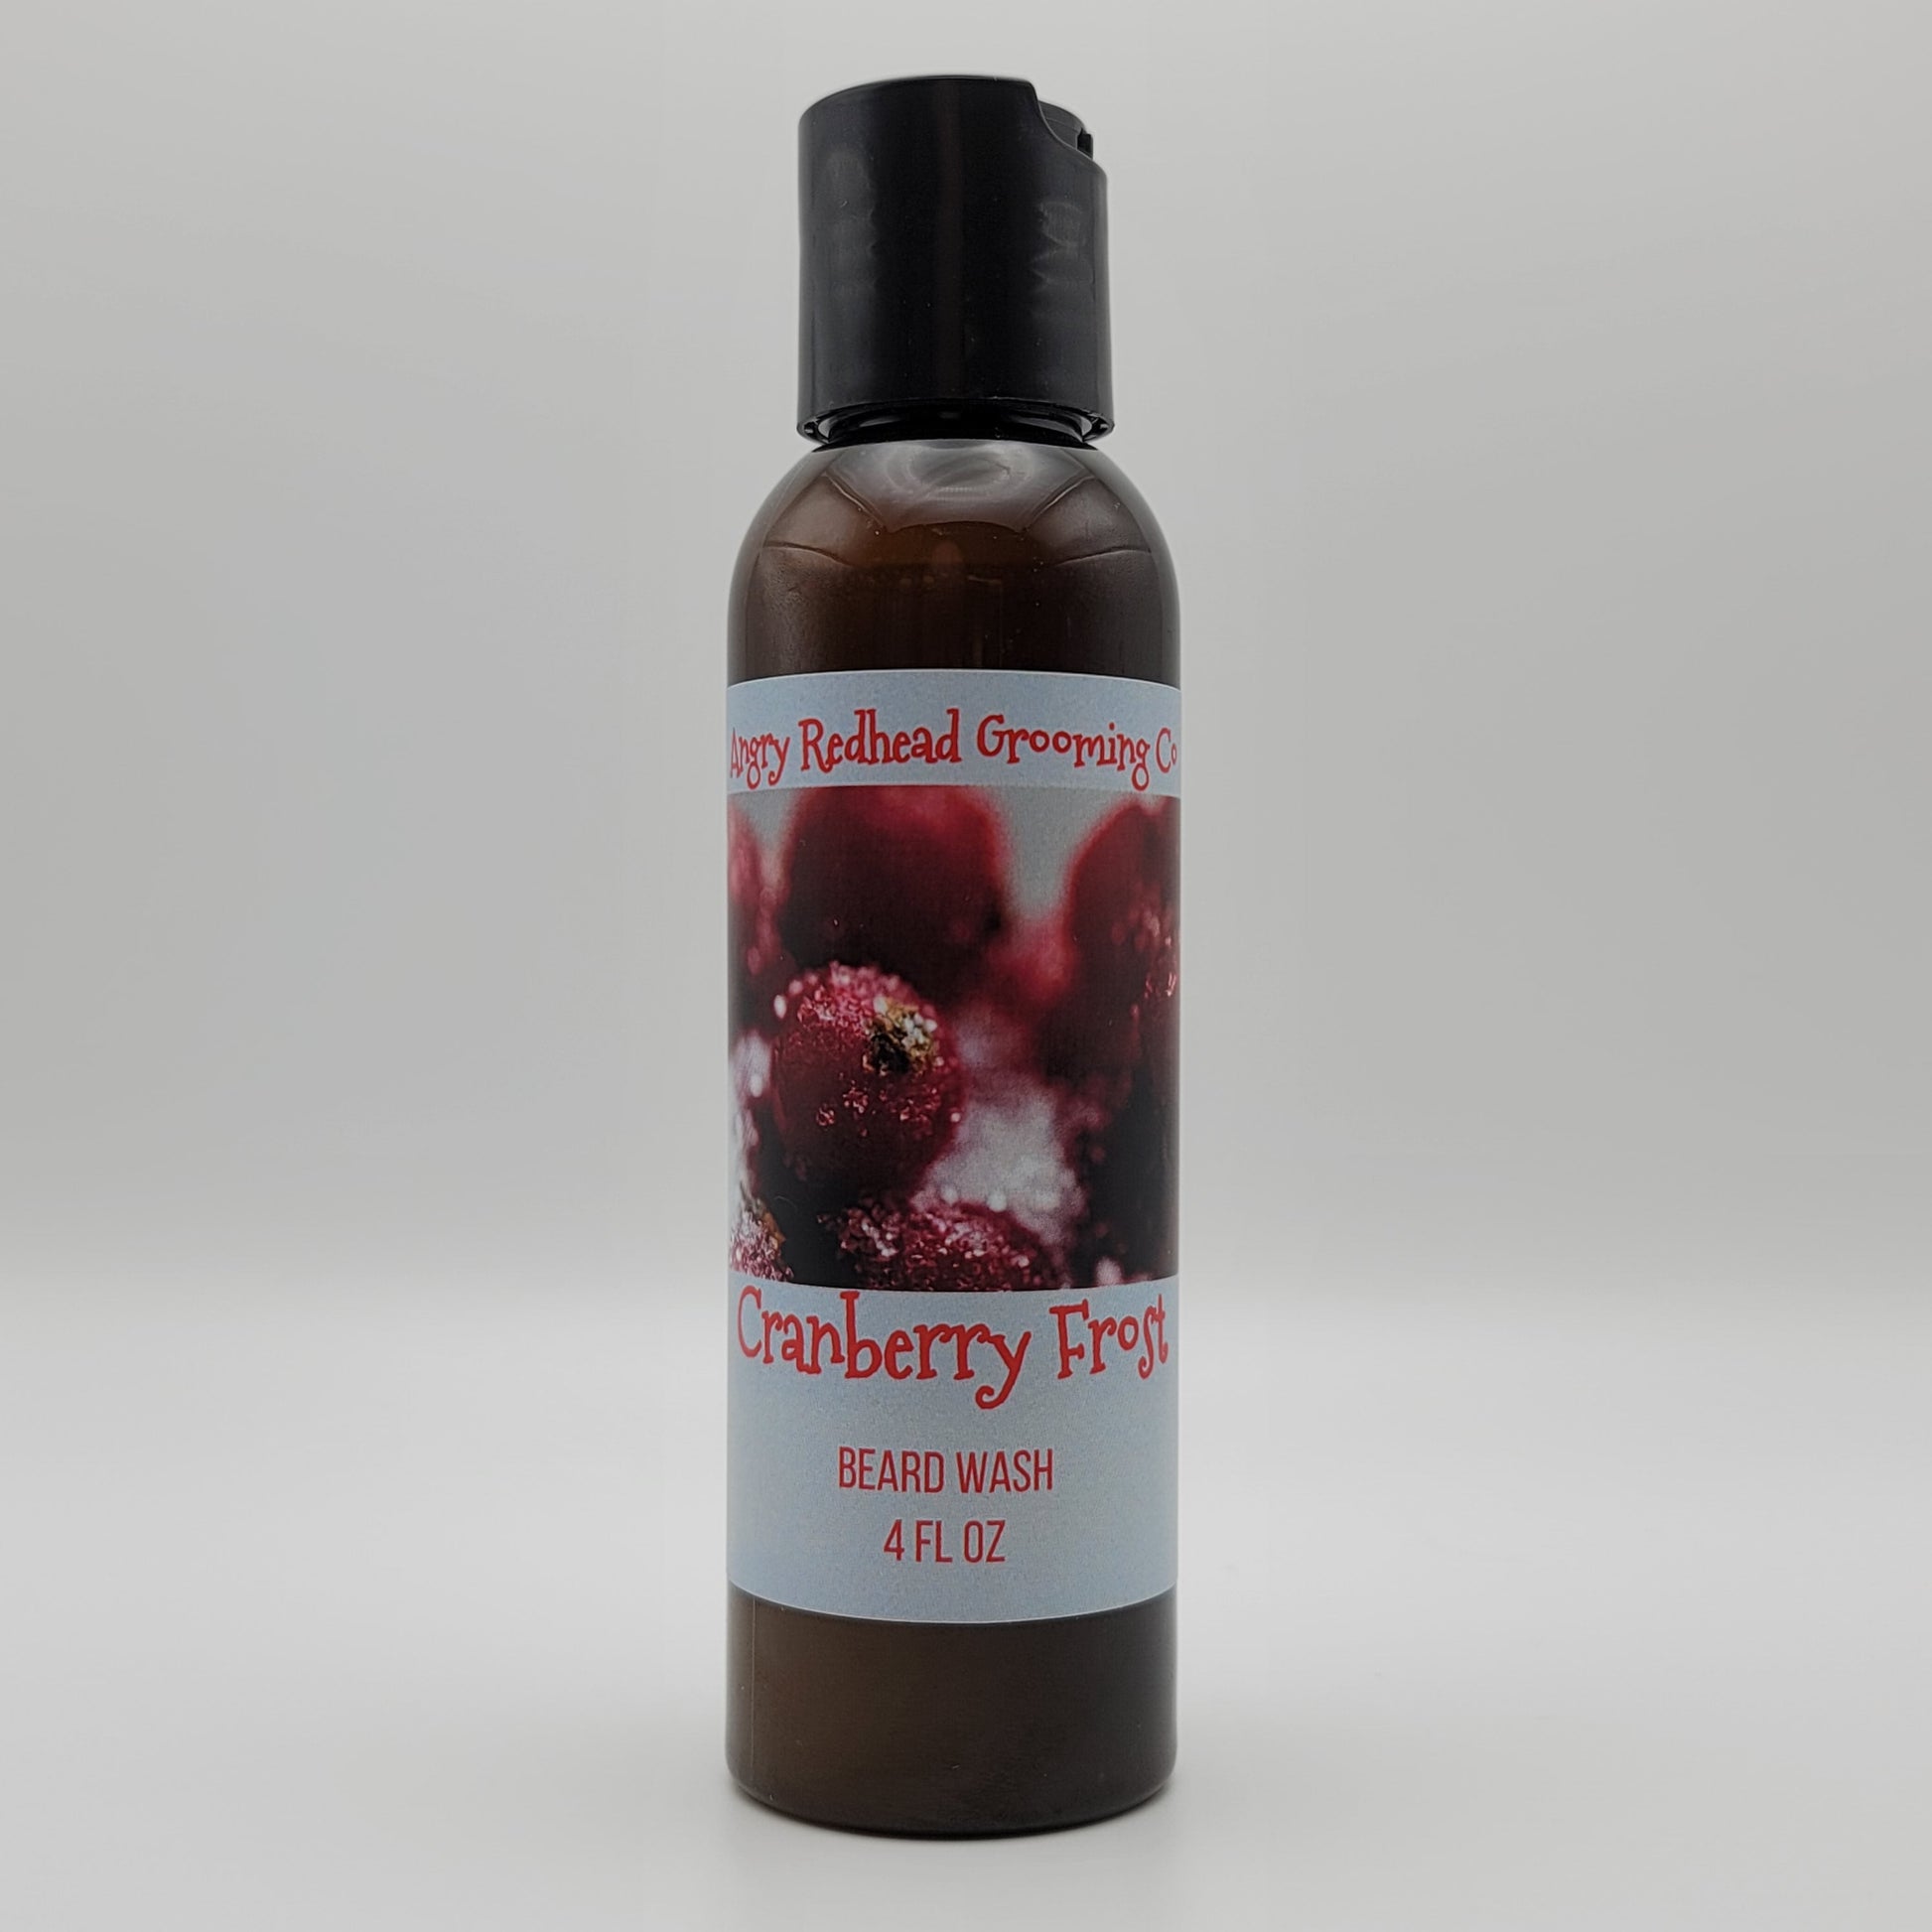 Cranberry Frost Beard Wash by Angry Redhead Grooming Co - angryredheadgrooming.com